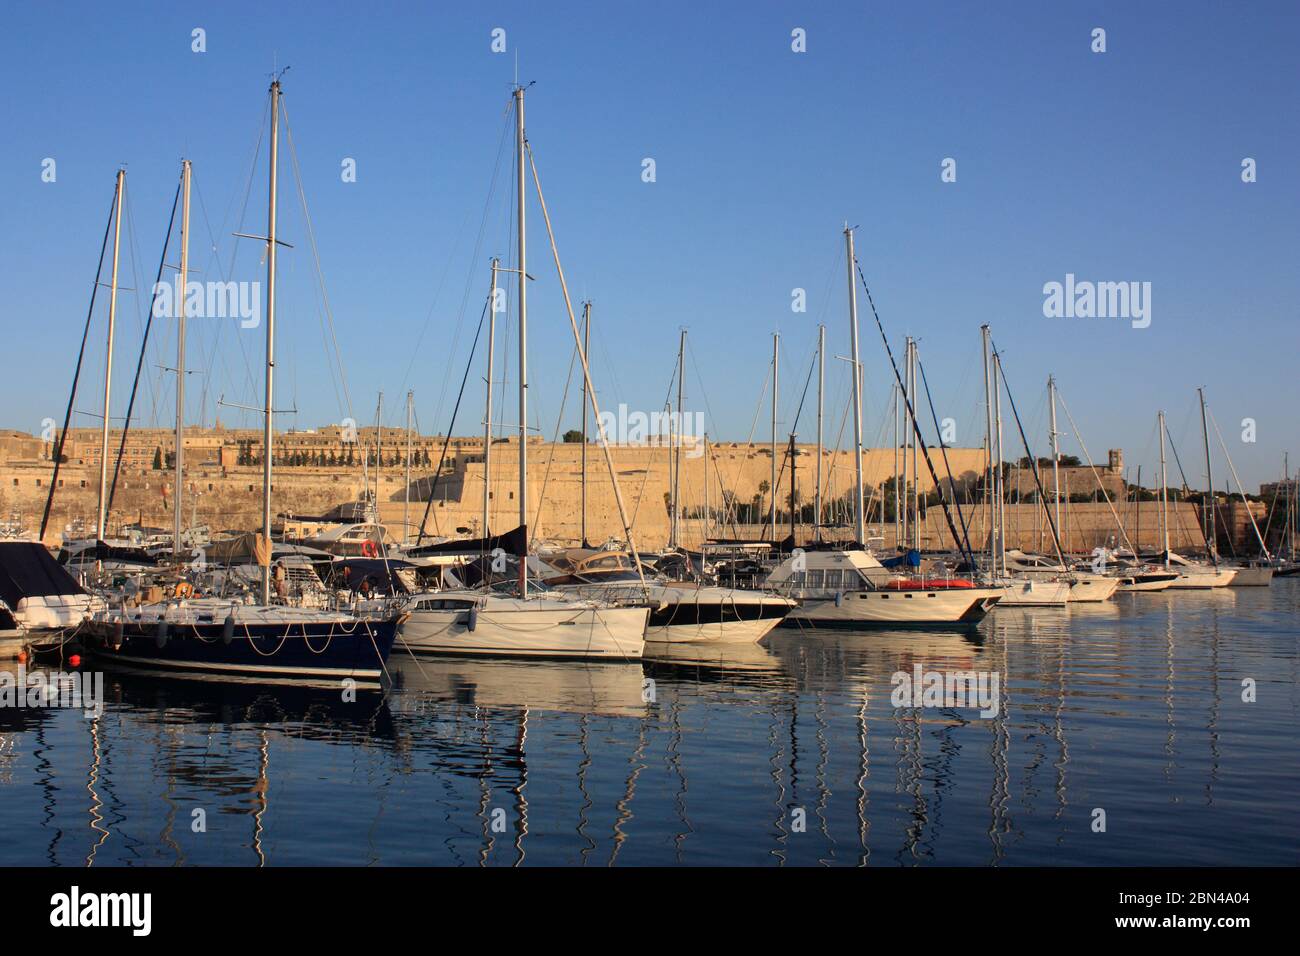 Yachts moored at Ta' Xbiex Yacht Marina, Malta, with the fortifications of Floriana in the background. Yachting in the Mediterranean Sea. Stock Photo